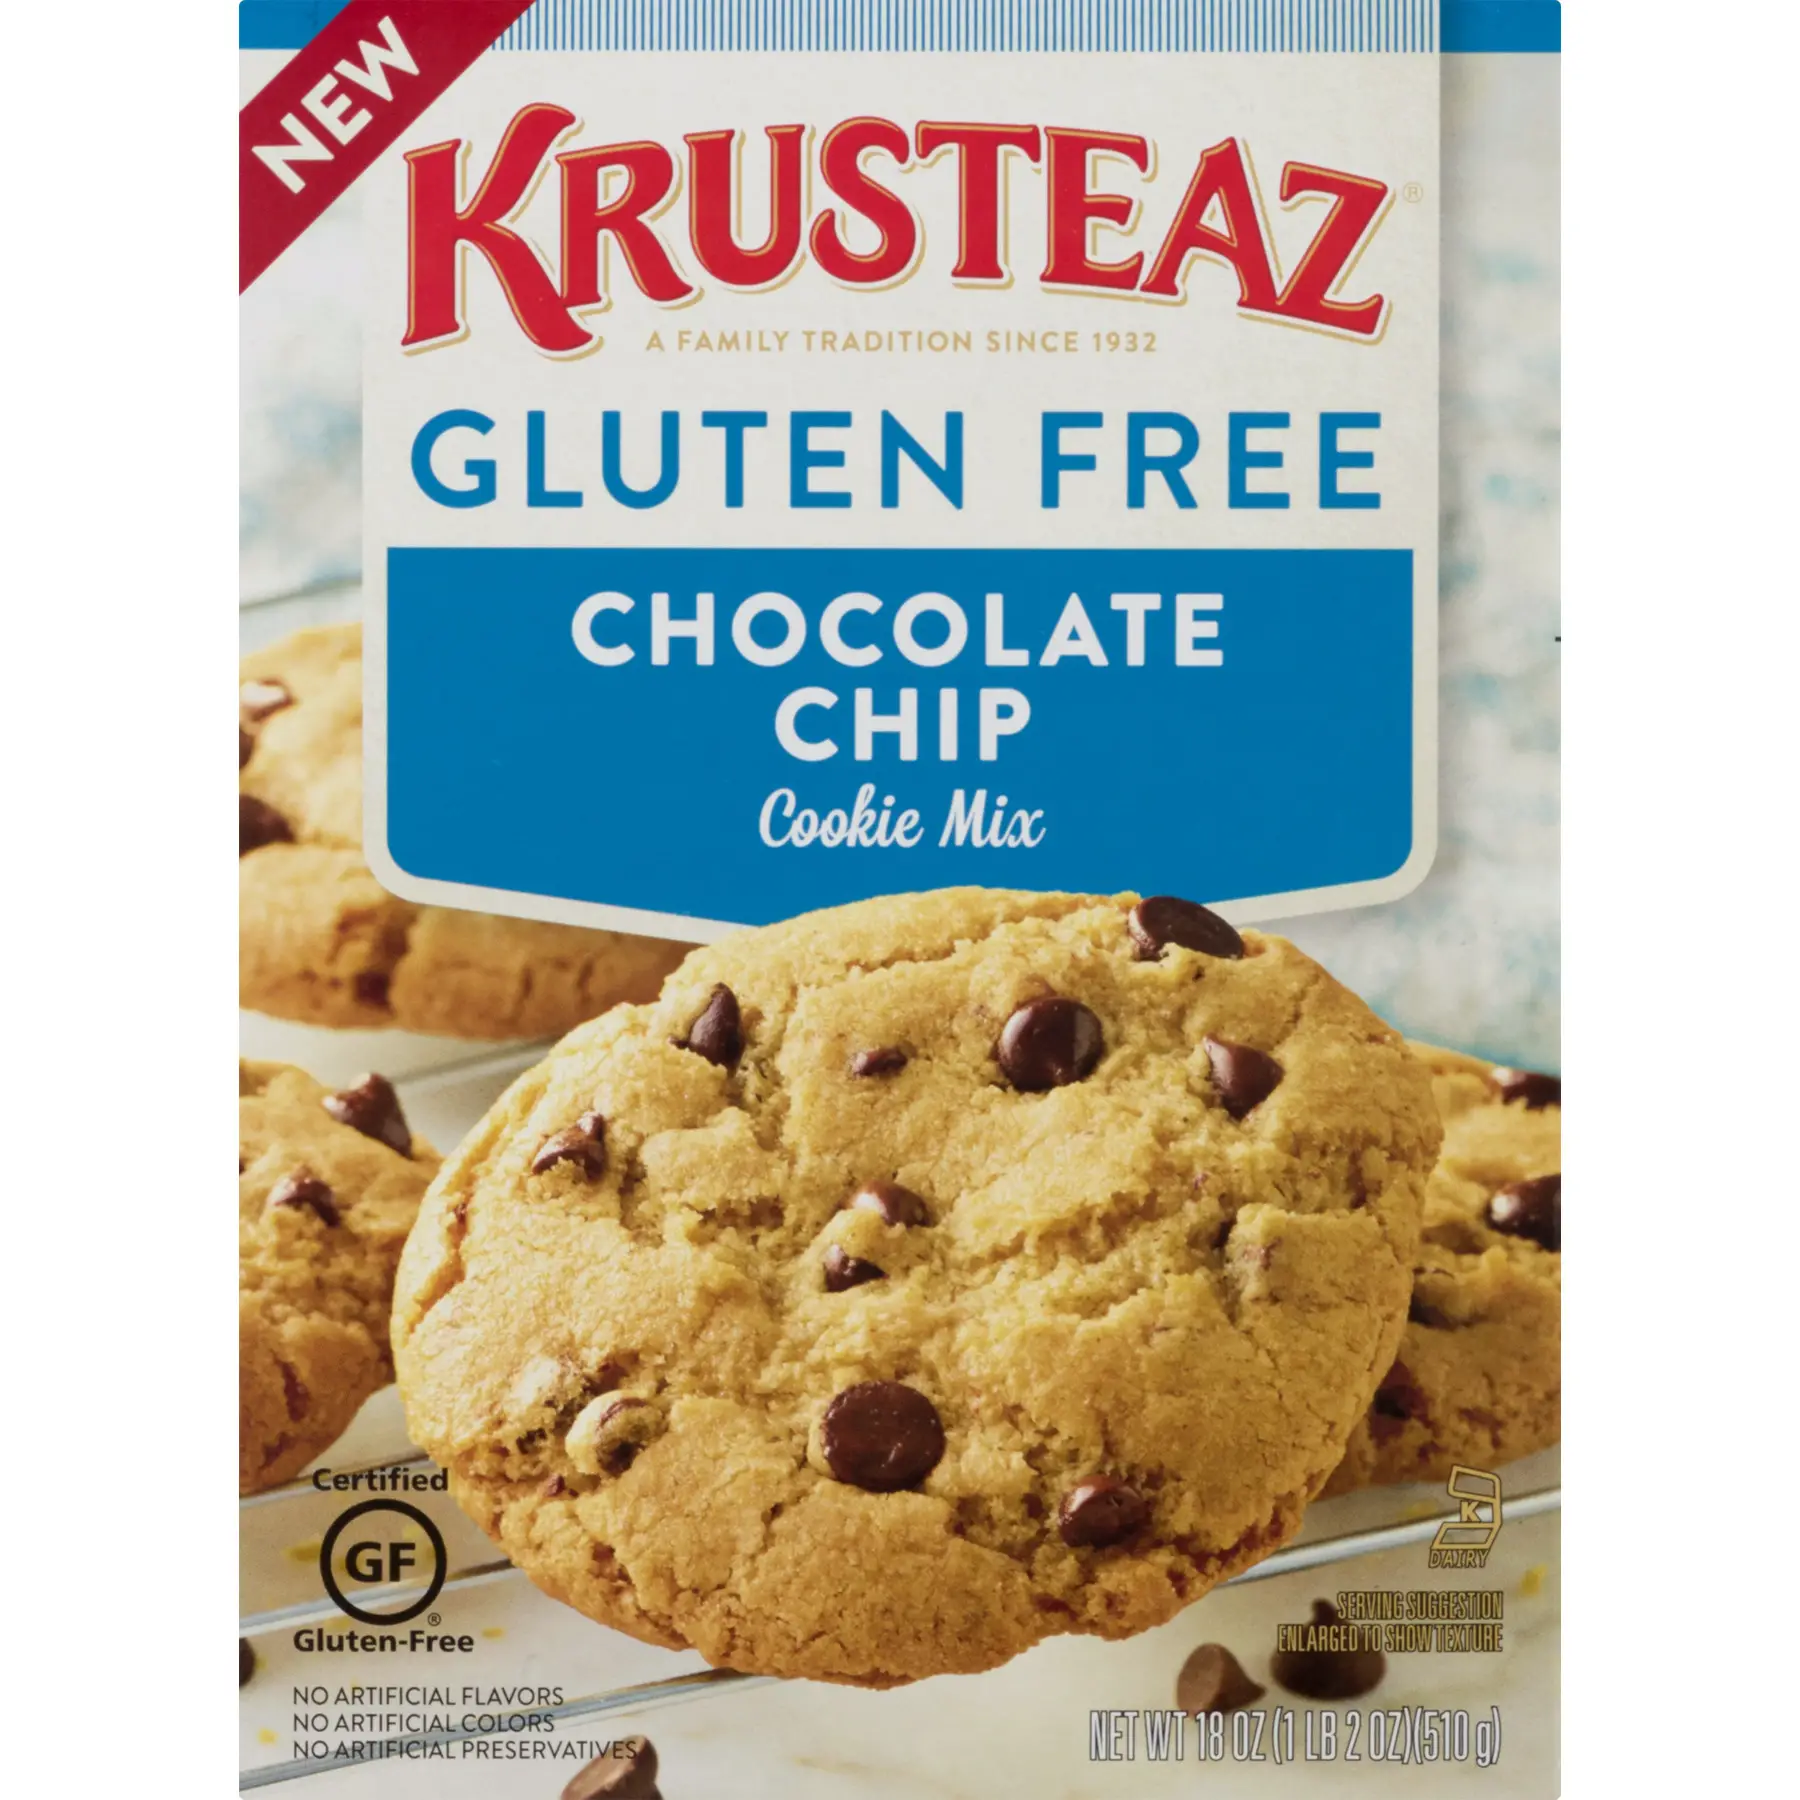 Krusteaz Gluten Free Chocolate Chip Cookie Mix, 20 Ounce